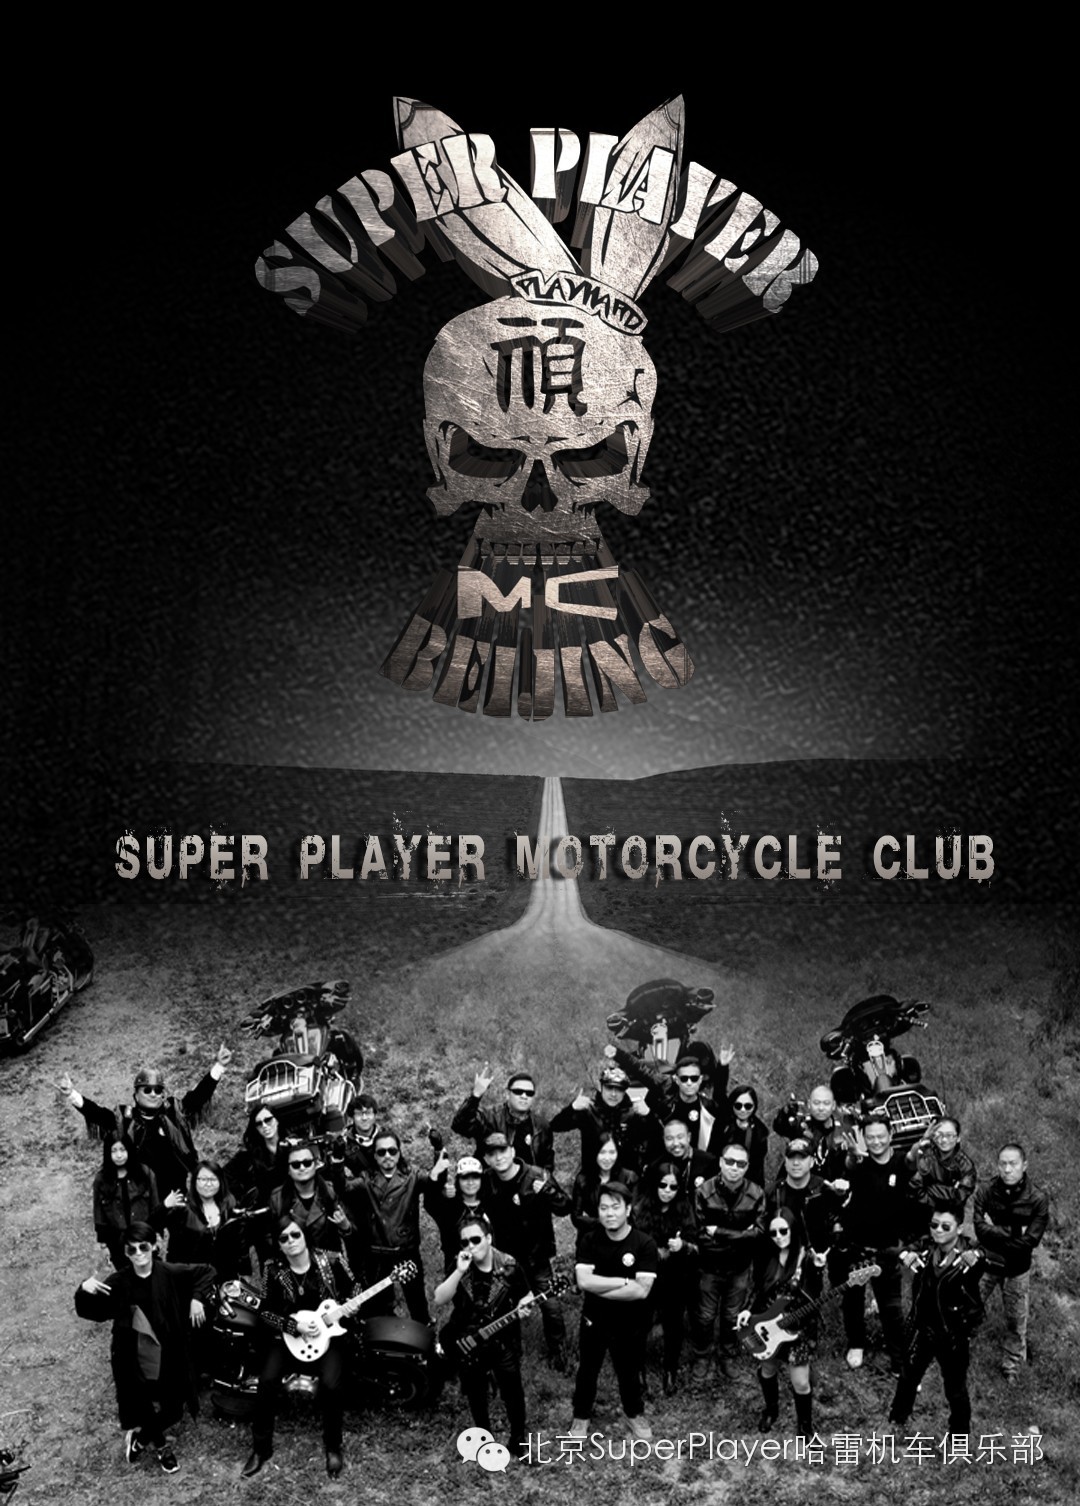 What are you waiting for? 北京SuperPlayer哈雷机车俱乐部